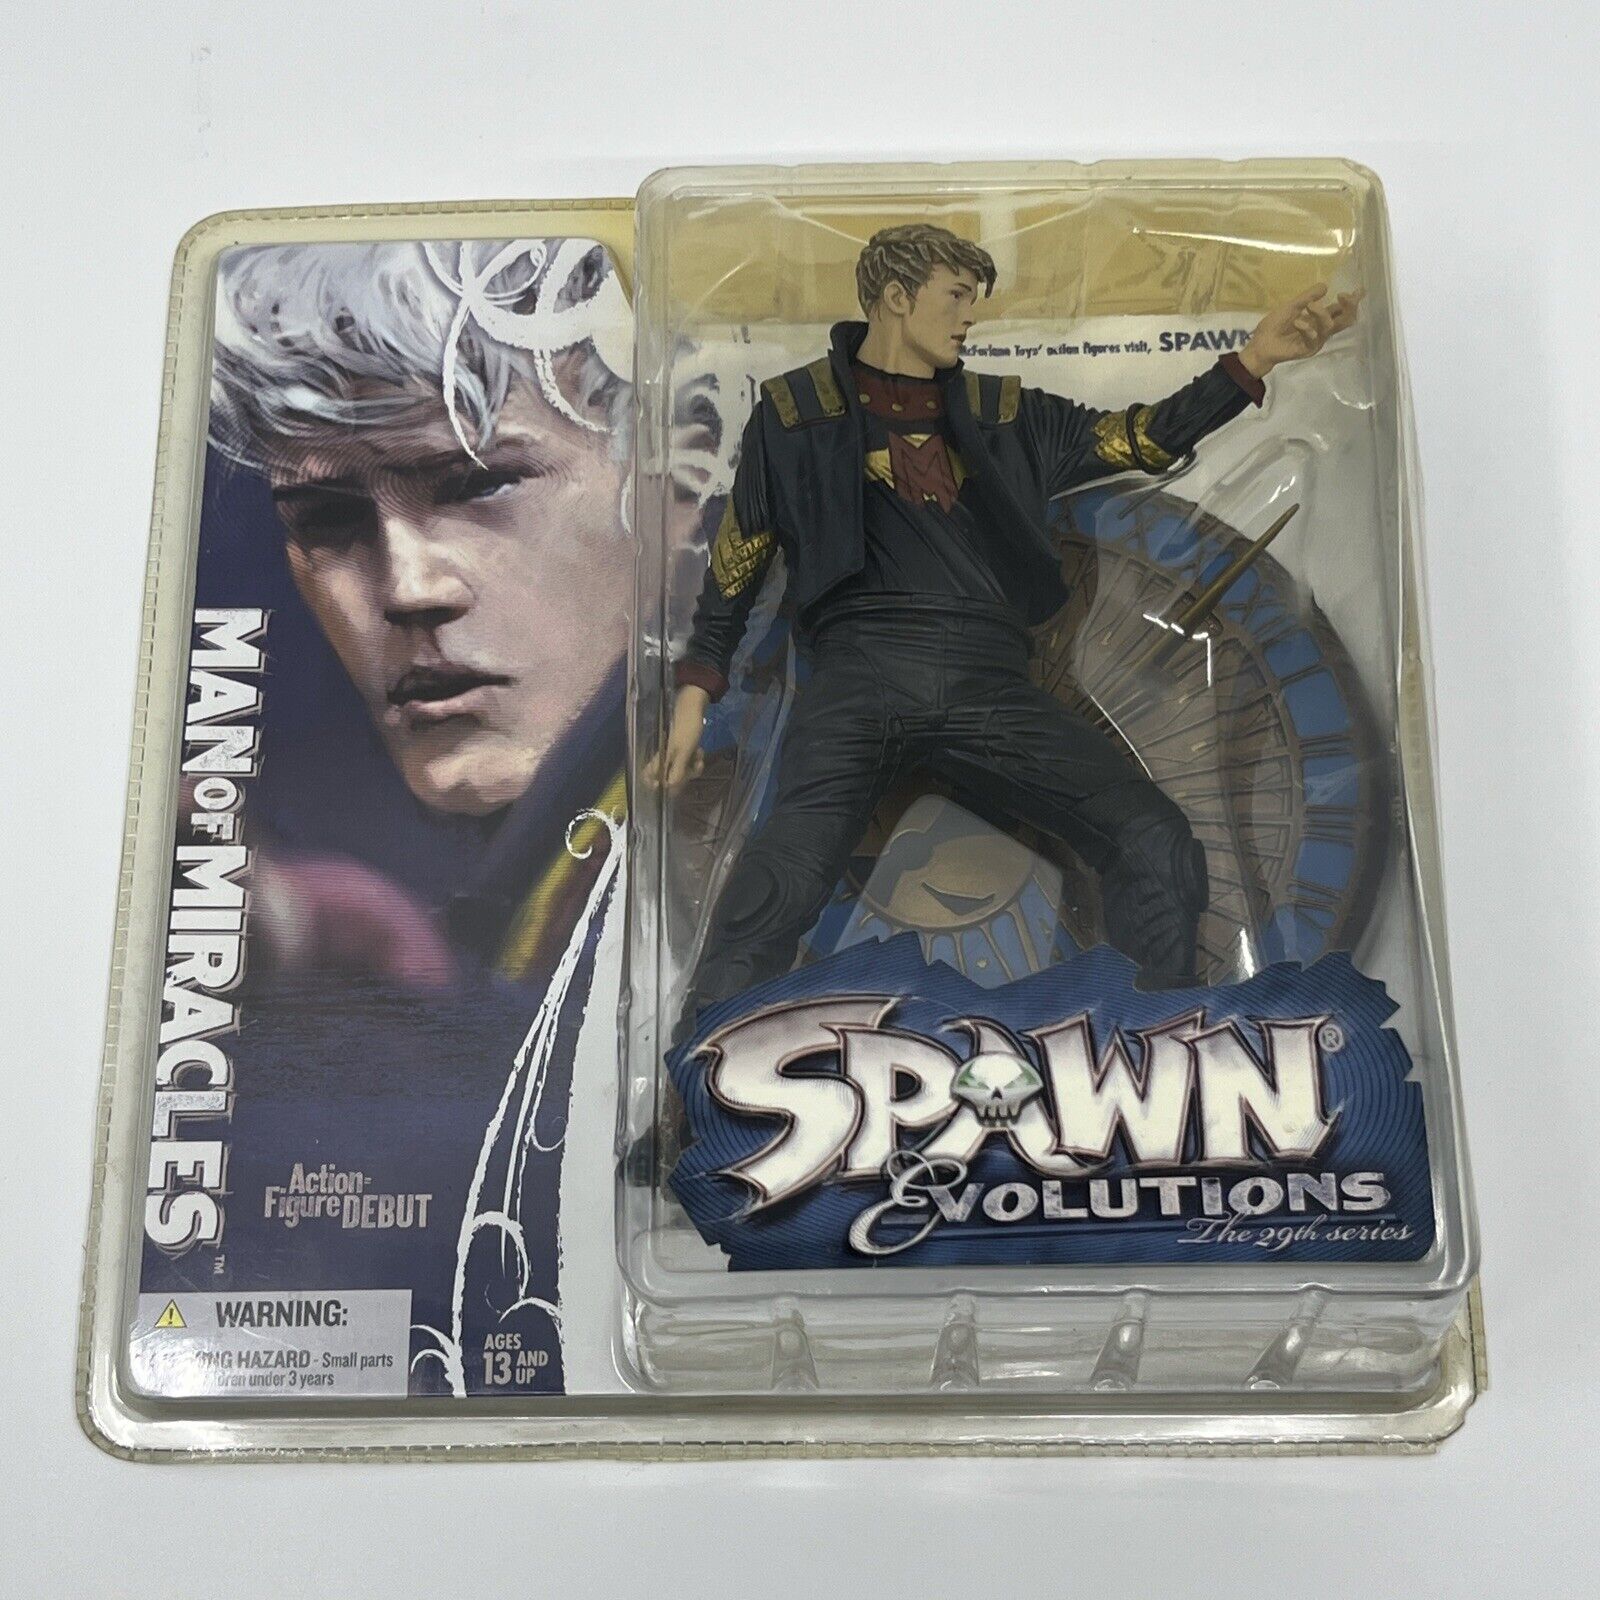 2006 Spawn Evolutions Man of Miracles 7” Action Figure 29th Series - New Sealed!